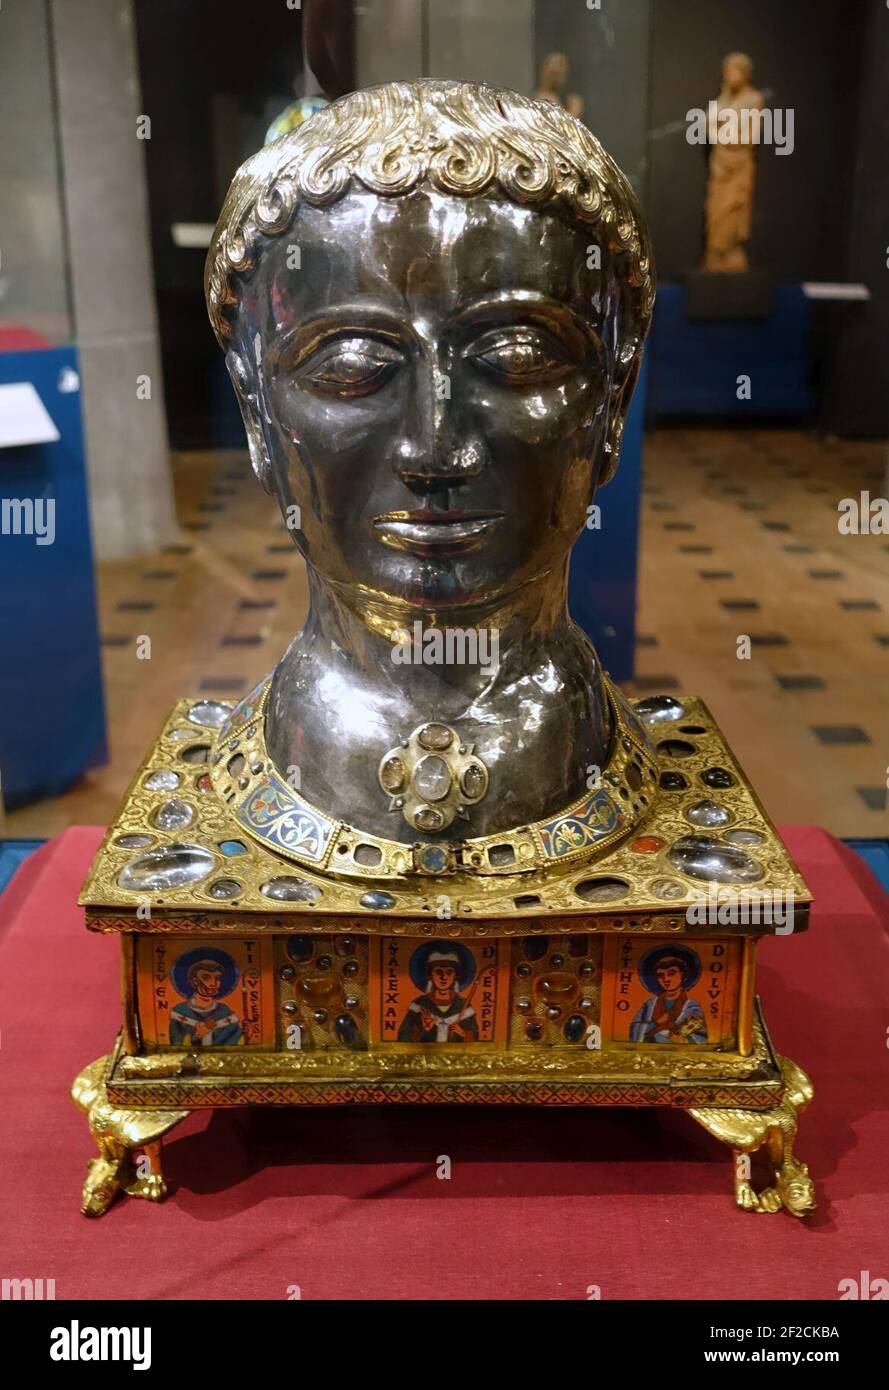 Pope Alexander head reliquary, from Abbey Saint-Remacle de Stavelot, Mosan workshop, c. 1145 AD, silver partially gilt, brass, enamel, precious stones Stock Photo